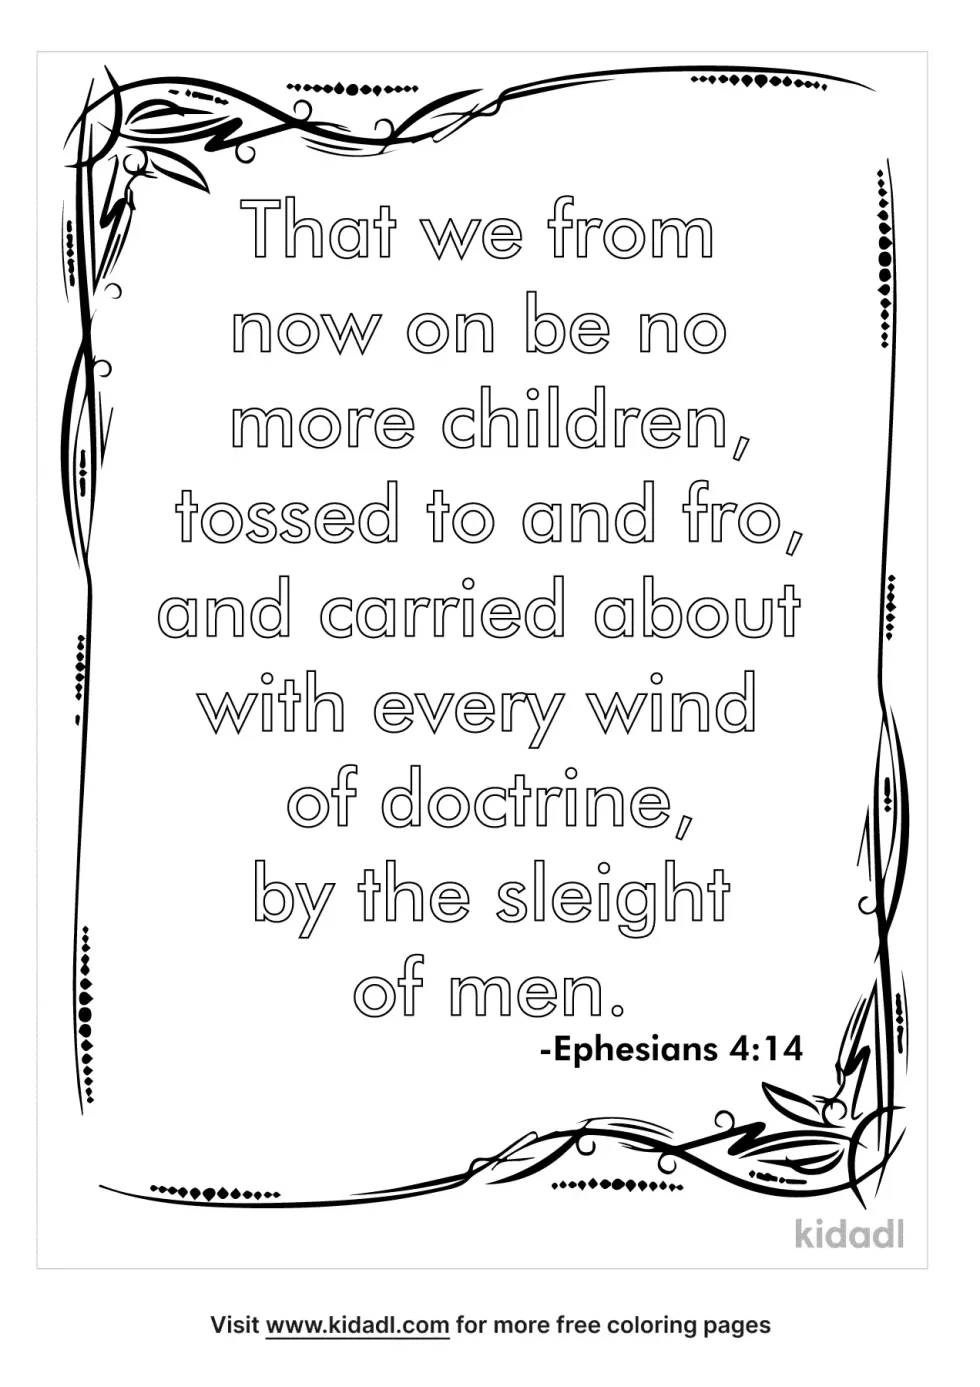 Ephesians 4:14 Coloring Page